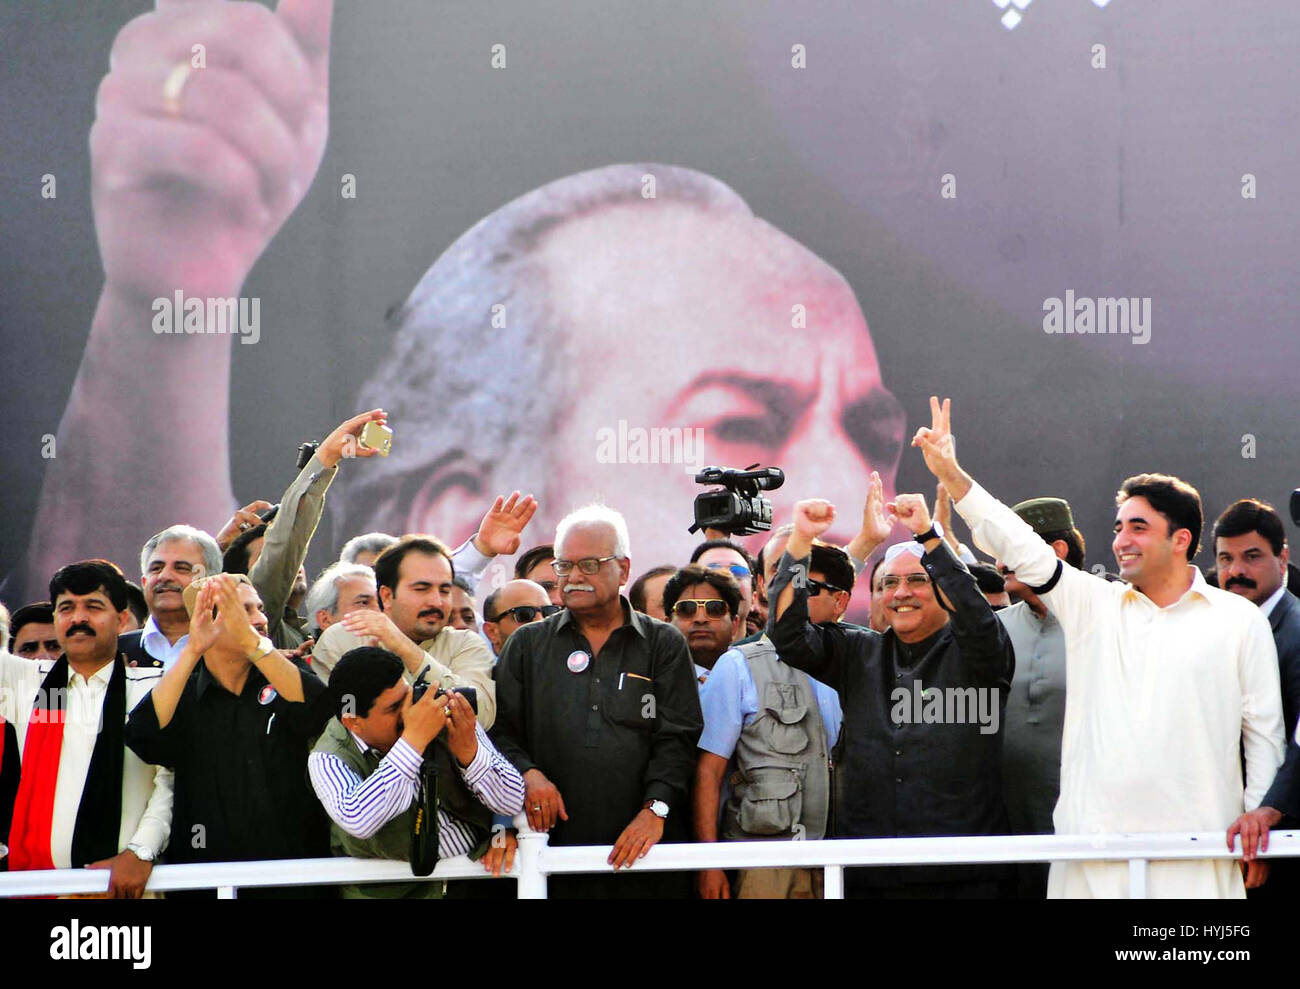 Karachi, Pakistan. 4th April, 2017. Peoples Party (PPP) Co-Chairman, Asif Ali Zardari along with Bilawal Bhutto Zardari and others are waving hands to the crowd on stage during public gather on occasion of 38th death anniversary commemorate of Peoples Party (PPP) Founder, Zulfiqar Ali Bhutto held at Bhutto's Mausoleum in Garhi Khuda Bux on Tuesday, April 04, 2017. Credit: Asianet-Pakistan/Alamy Live News Stock Photo